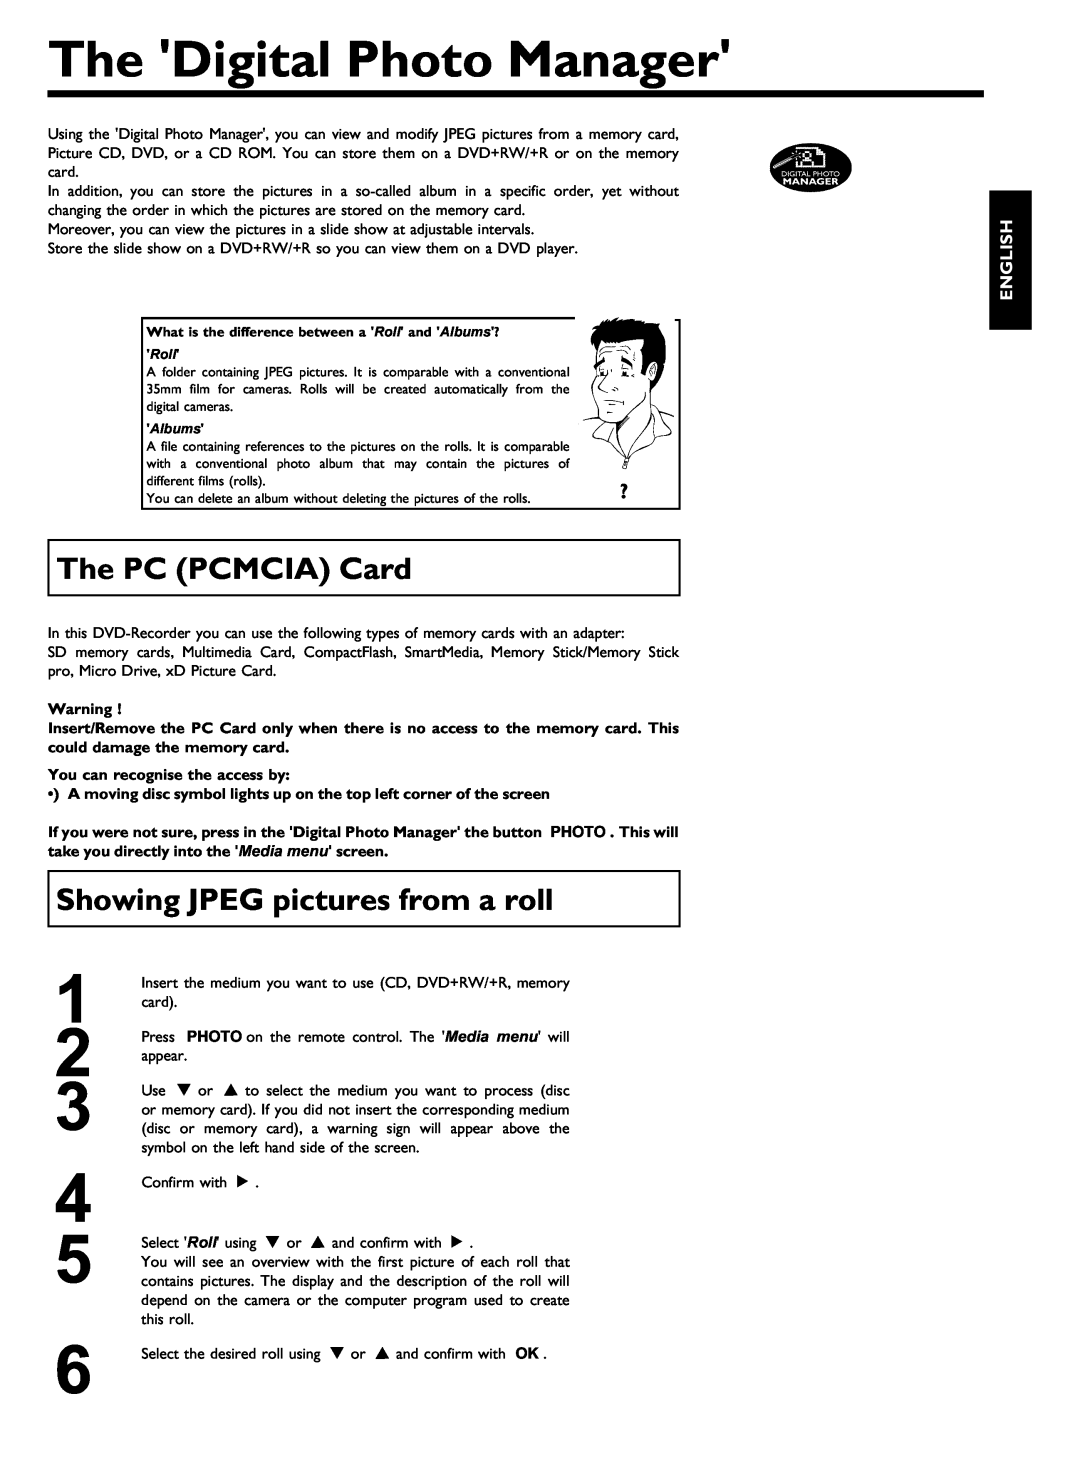 Philips DVDR77/17 manual The Digital Photo Manager, The PC PCMCIA Card, Showing JPEG pictures from a roll, English 